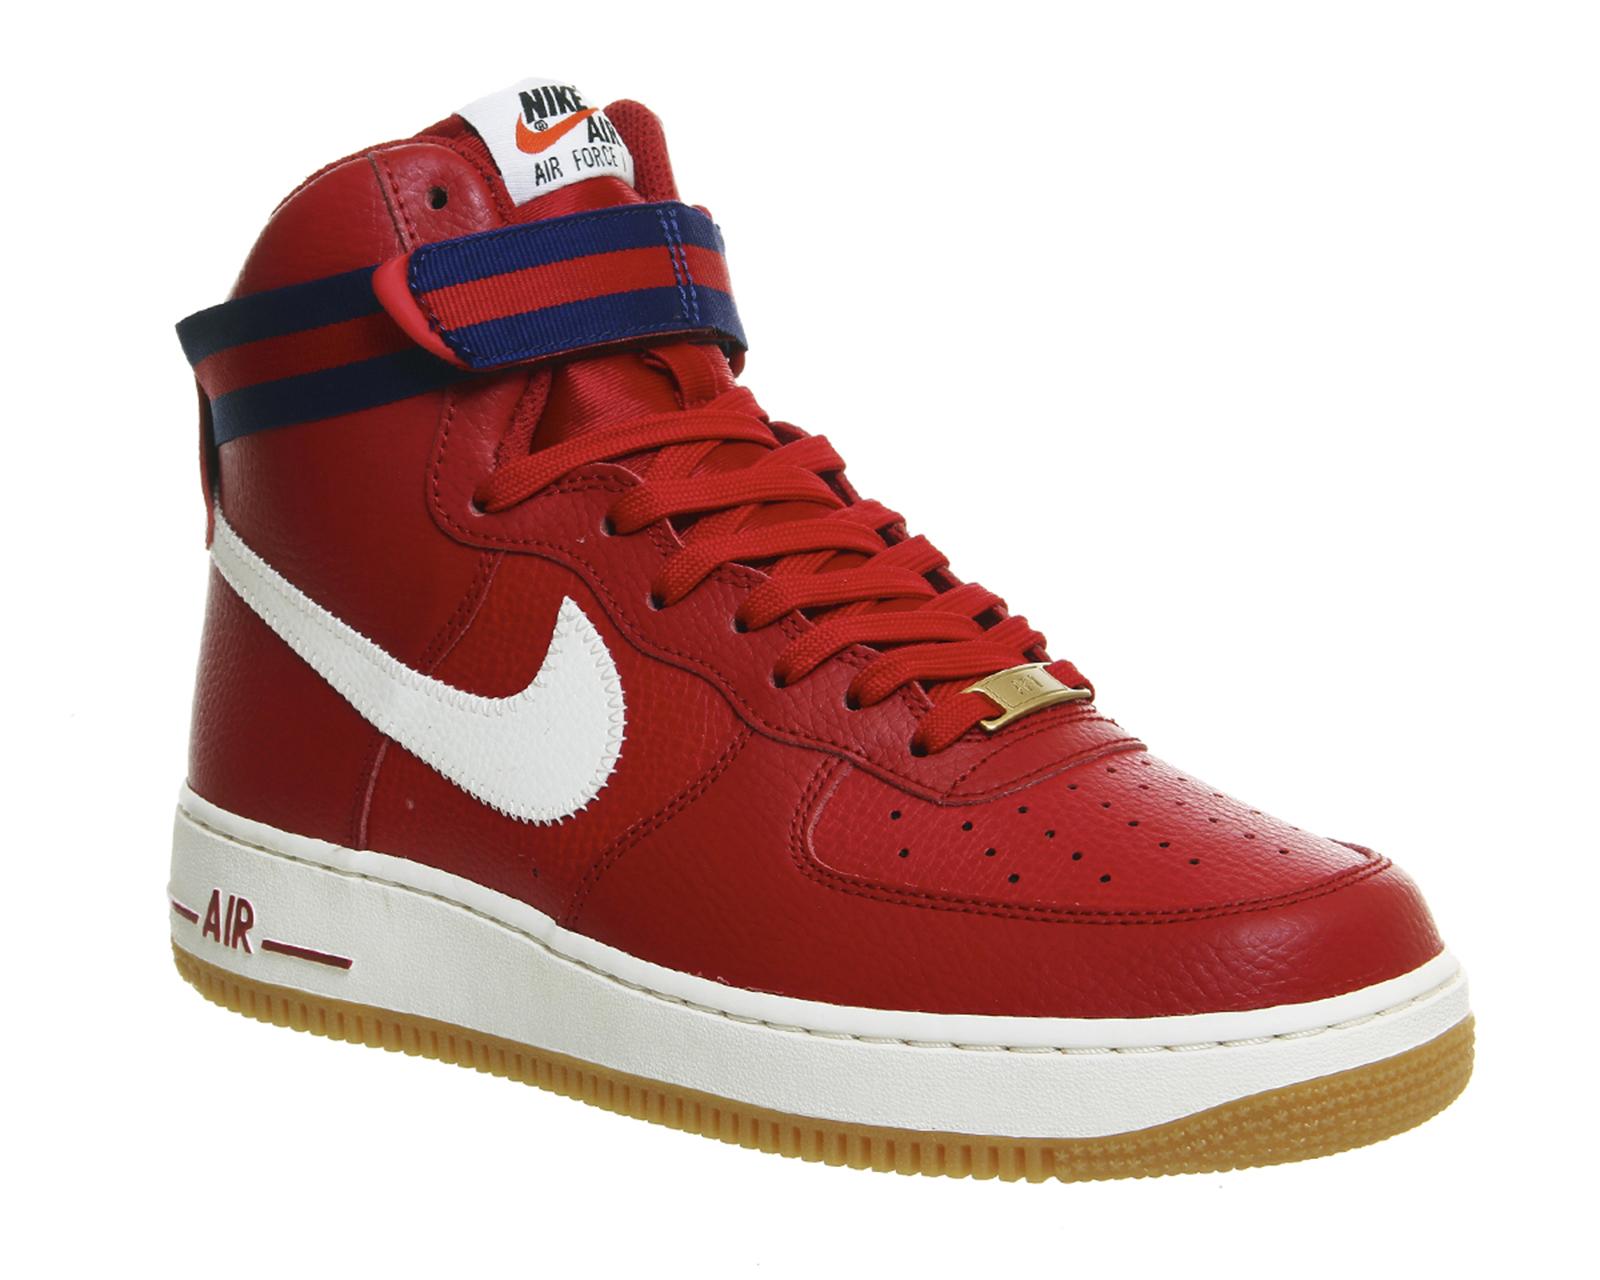 Lyst - Nike Air Force 1 Hi in Red for Men